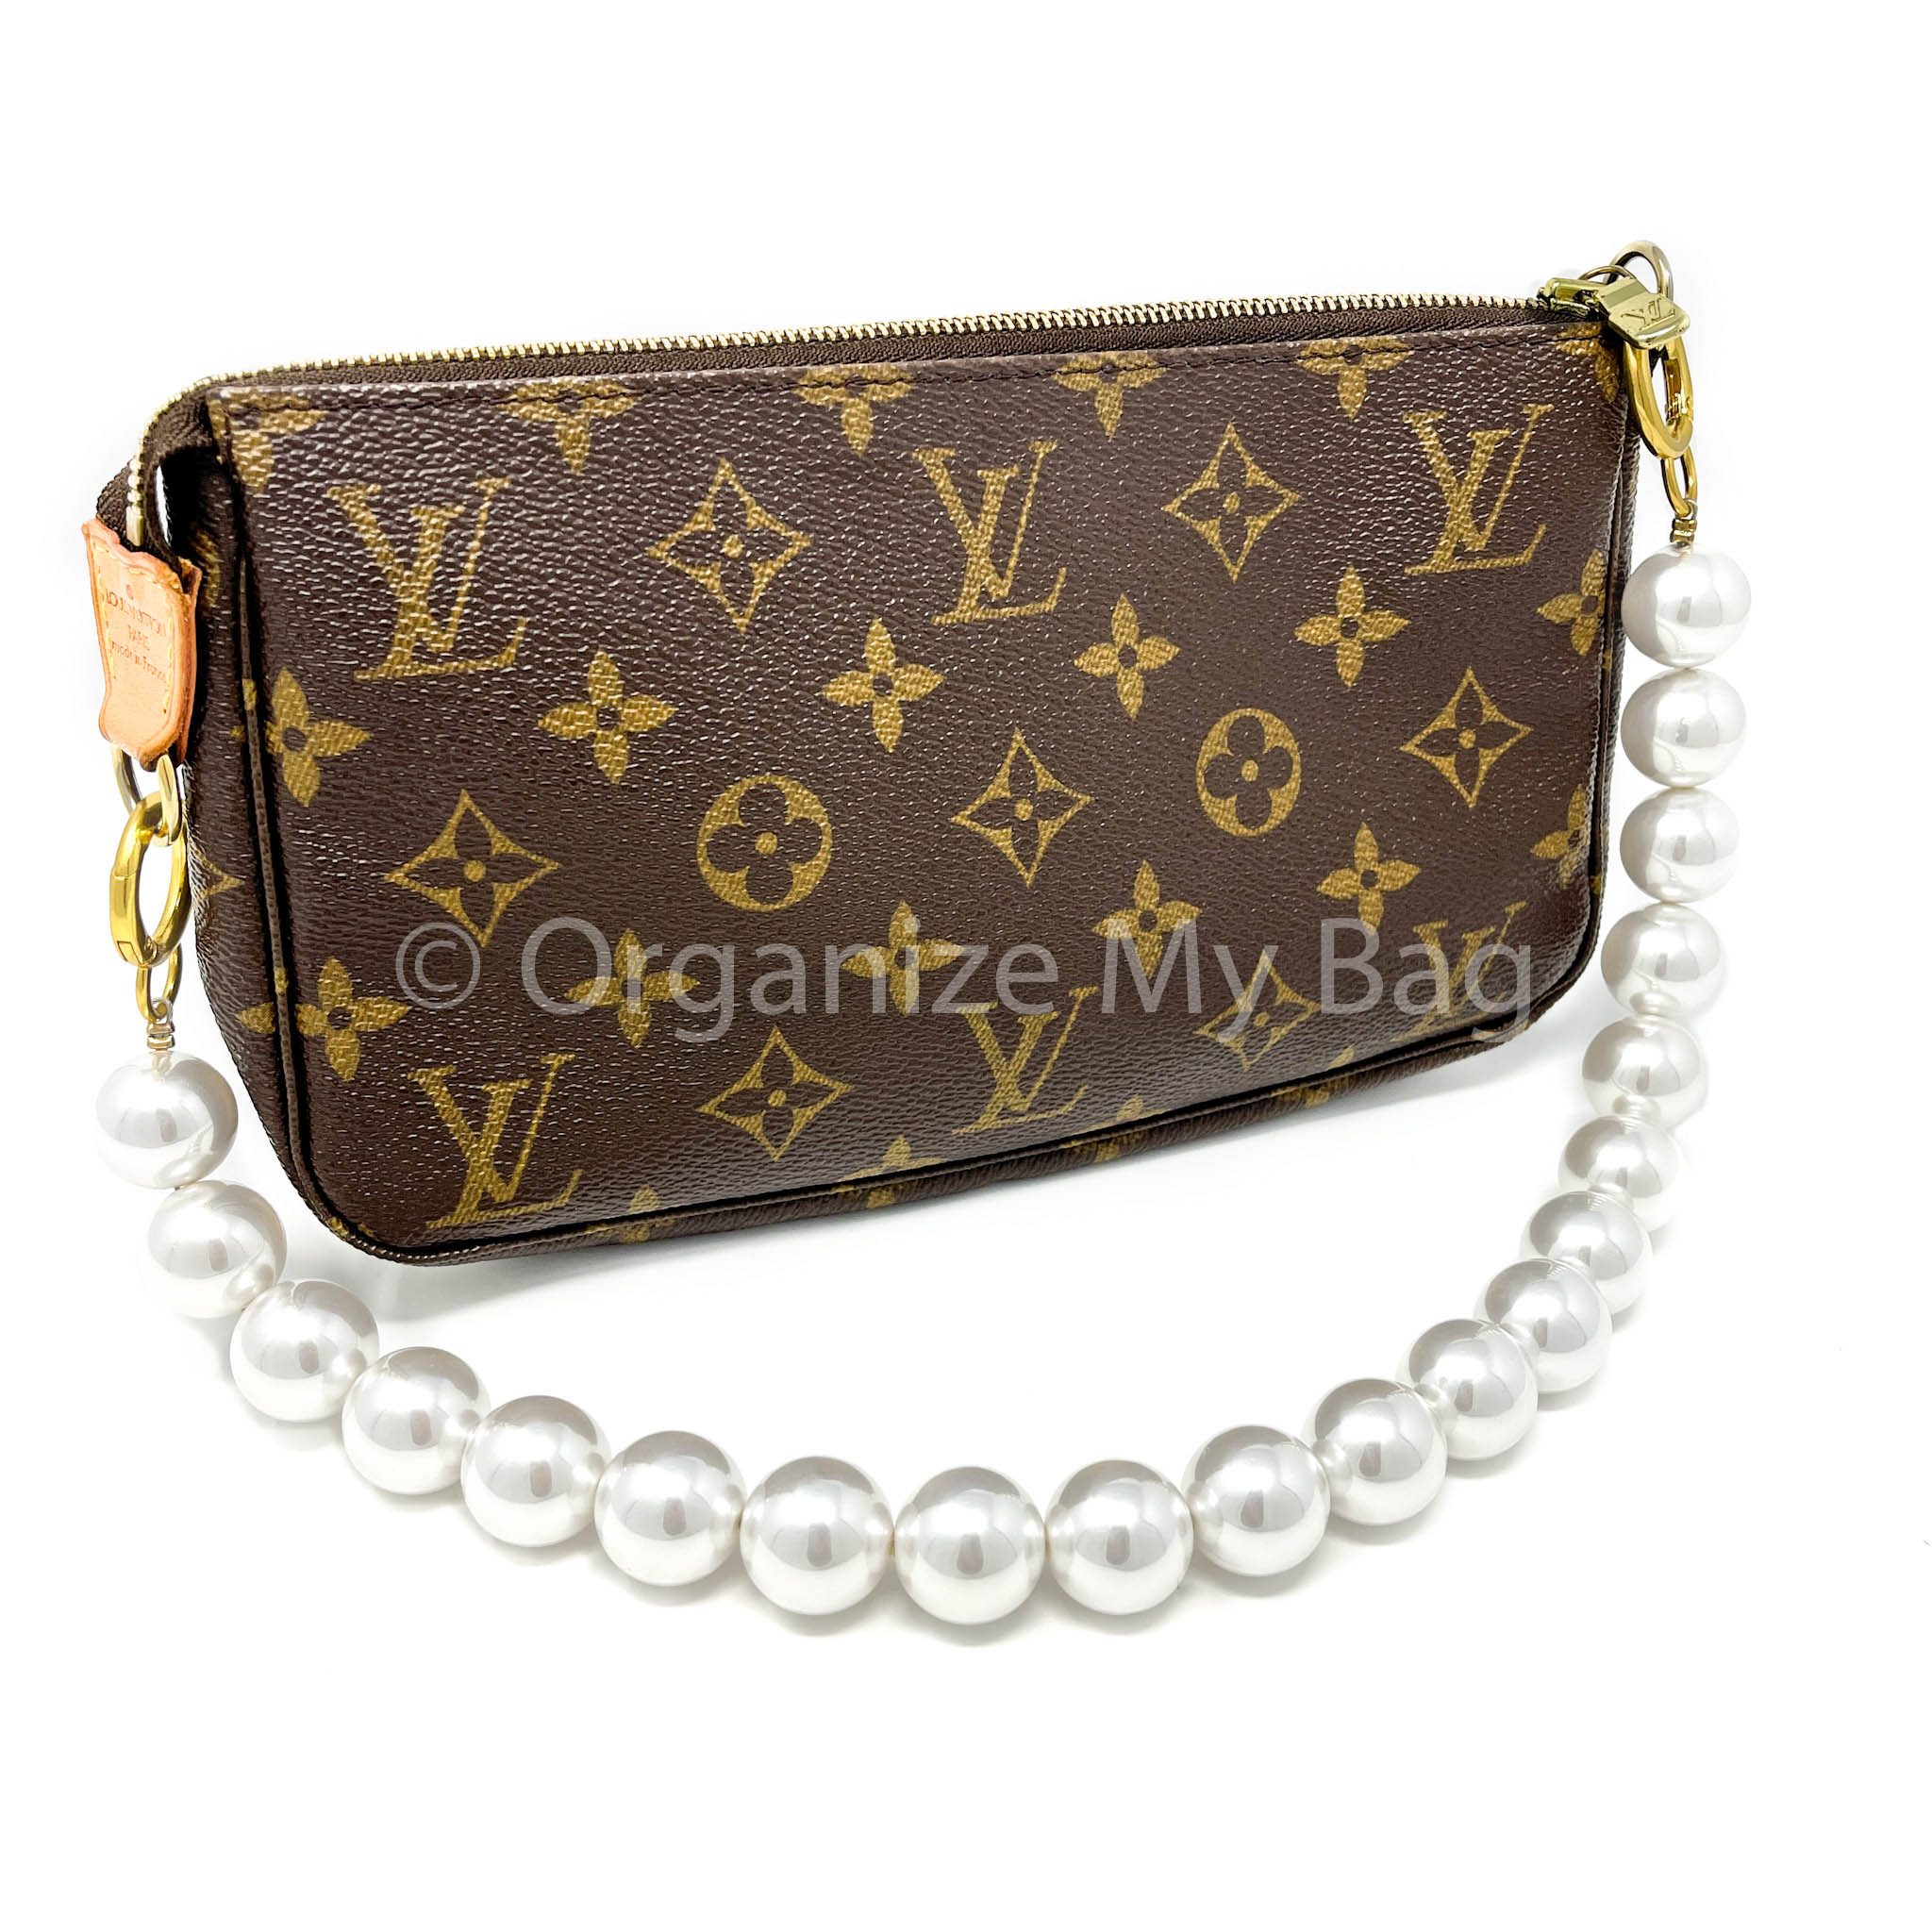 Organize My Bag Pearl Charm or Strap Shoulder Strap / Top Handle